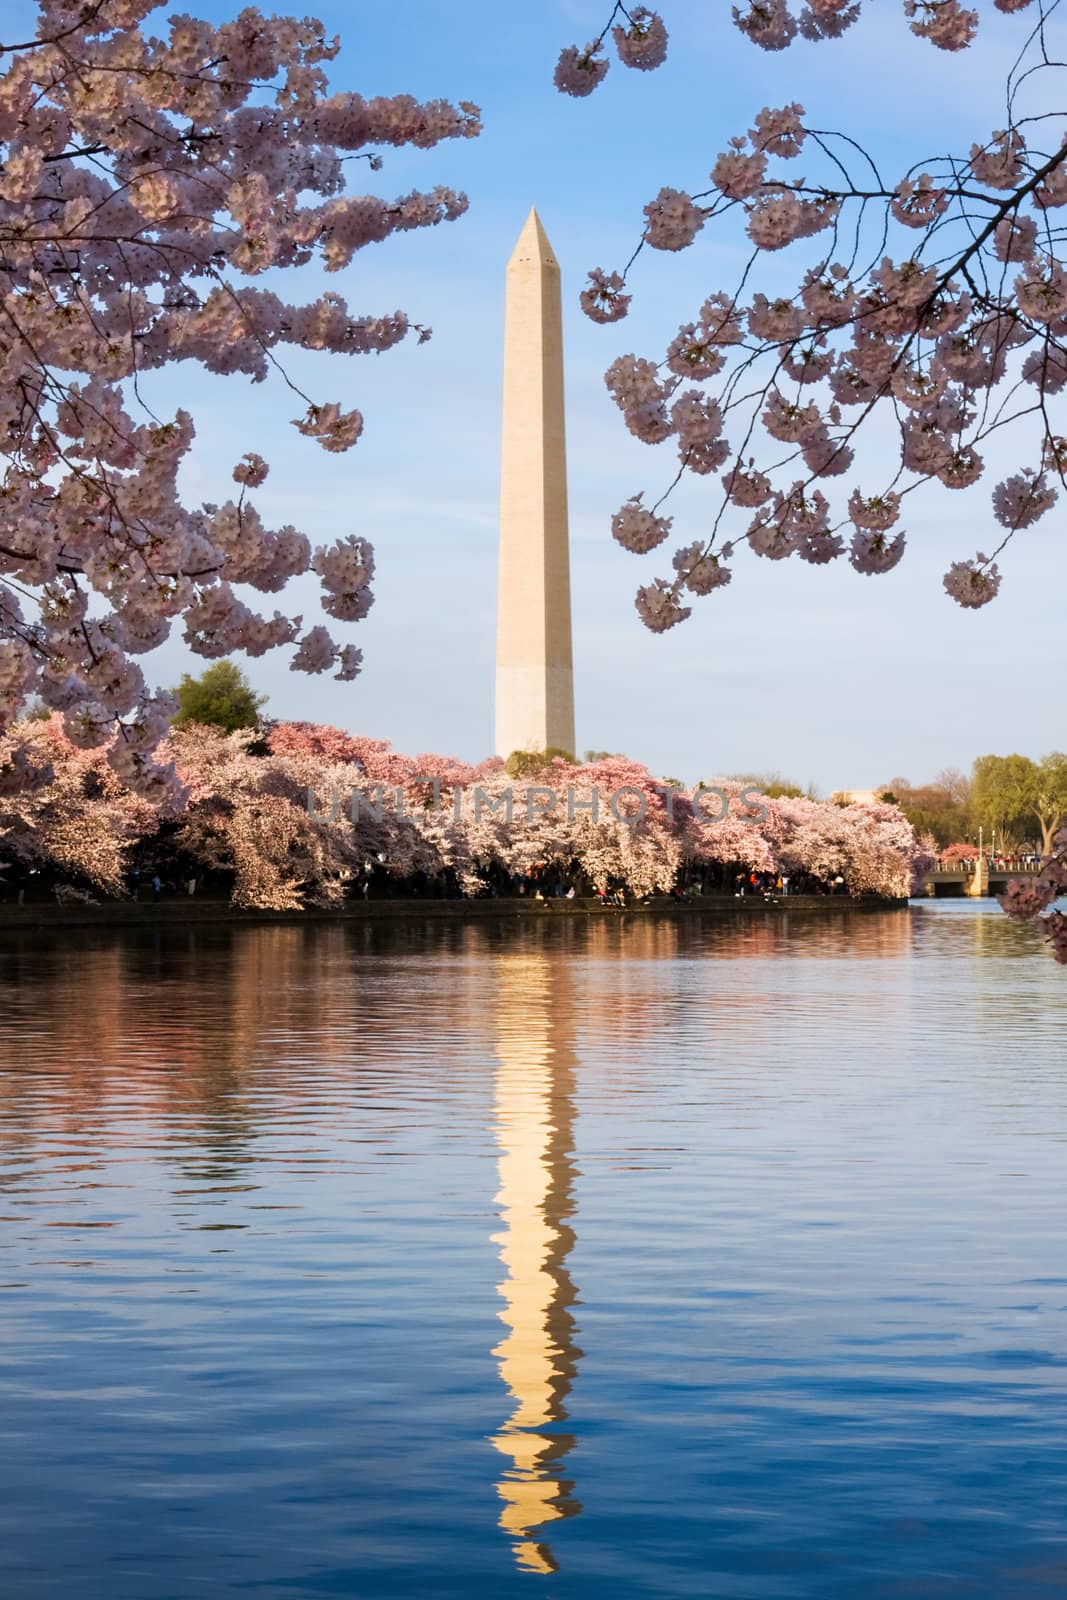 Washington Monument surrounded by cherry blossom by steheap